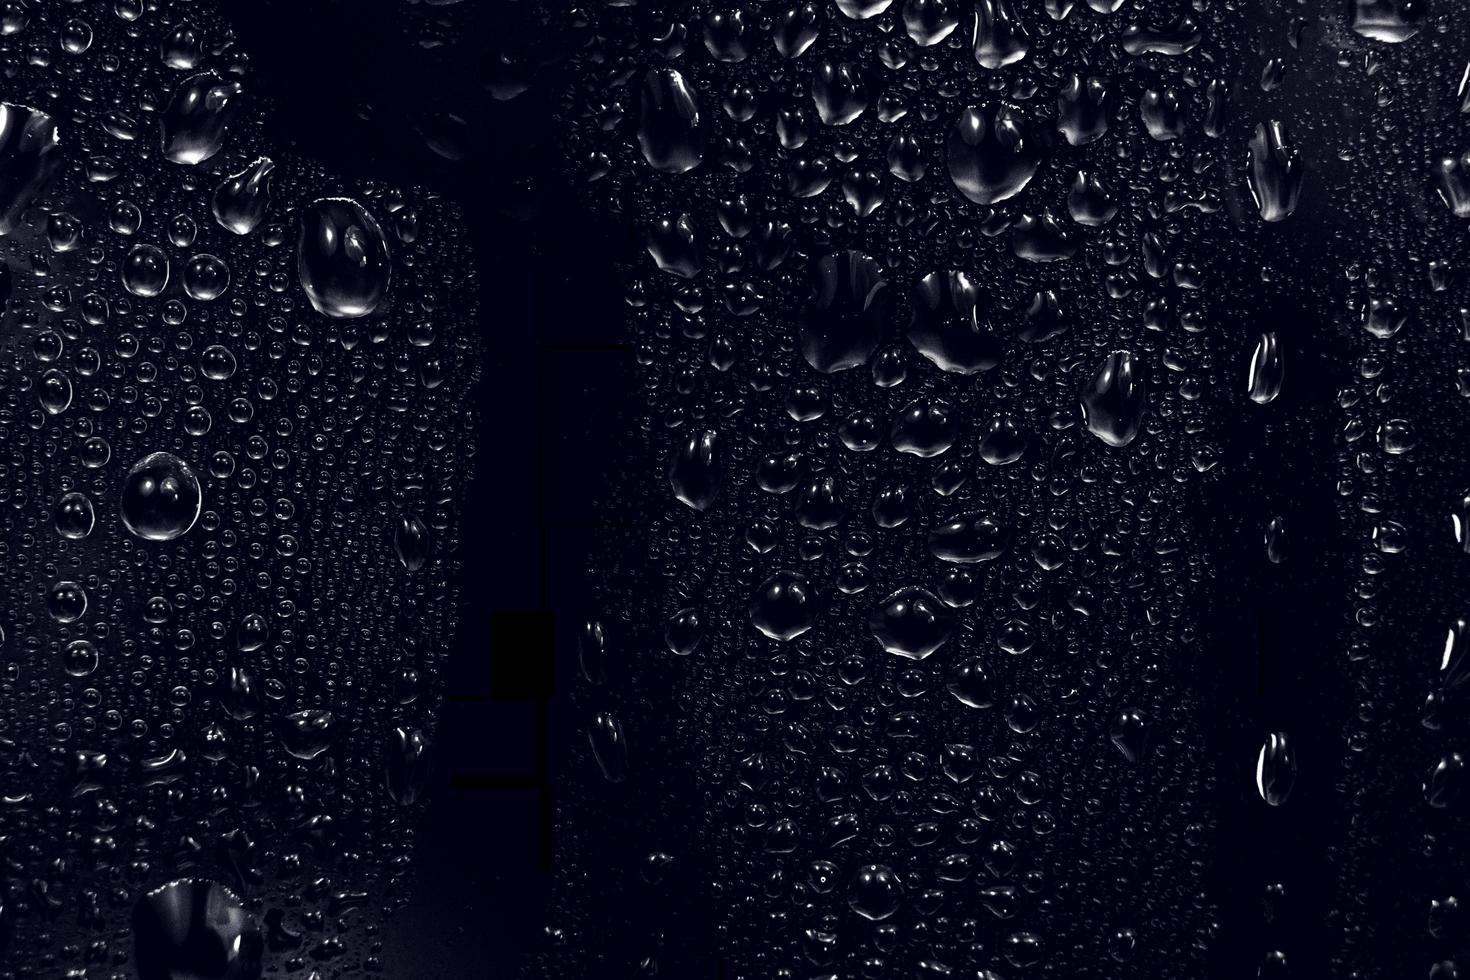 water drops on black background. abstract dew water droplets on a window glass for photo overlay effect or giving fresh effect on beverages mockup. macro shot of the detailed raindrop.